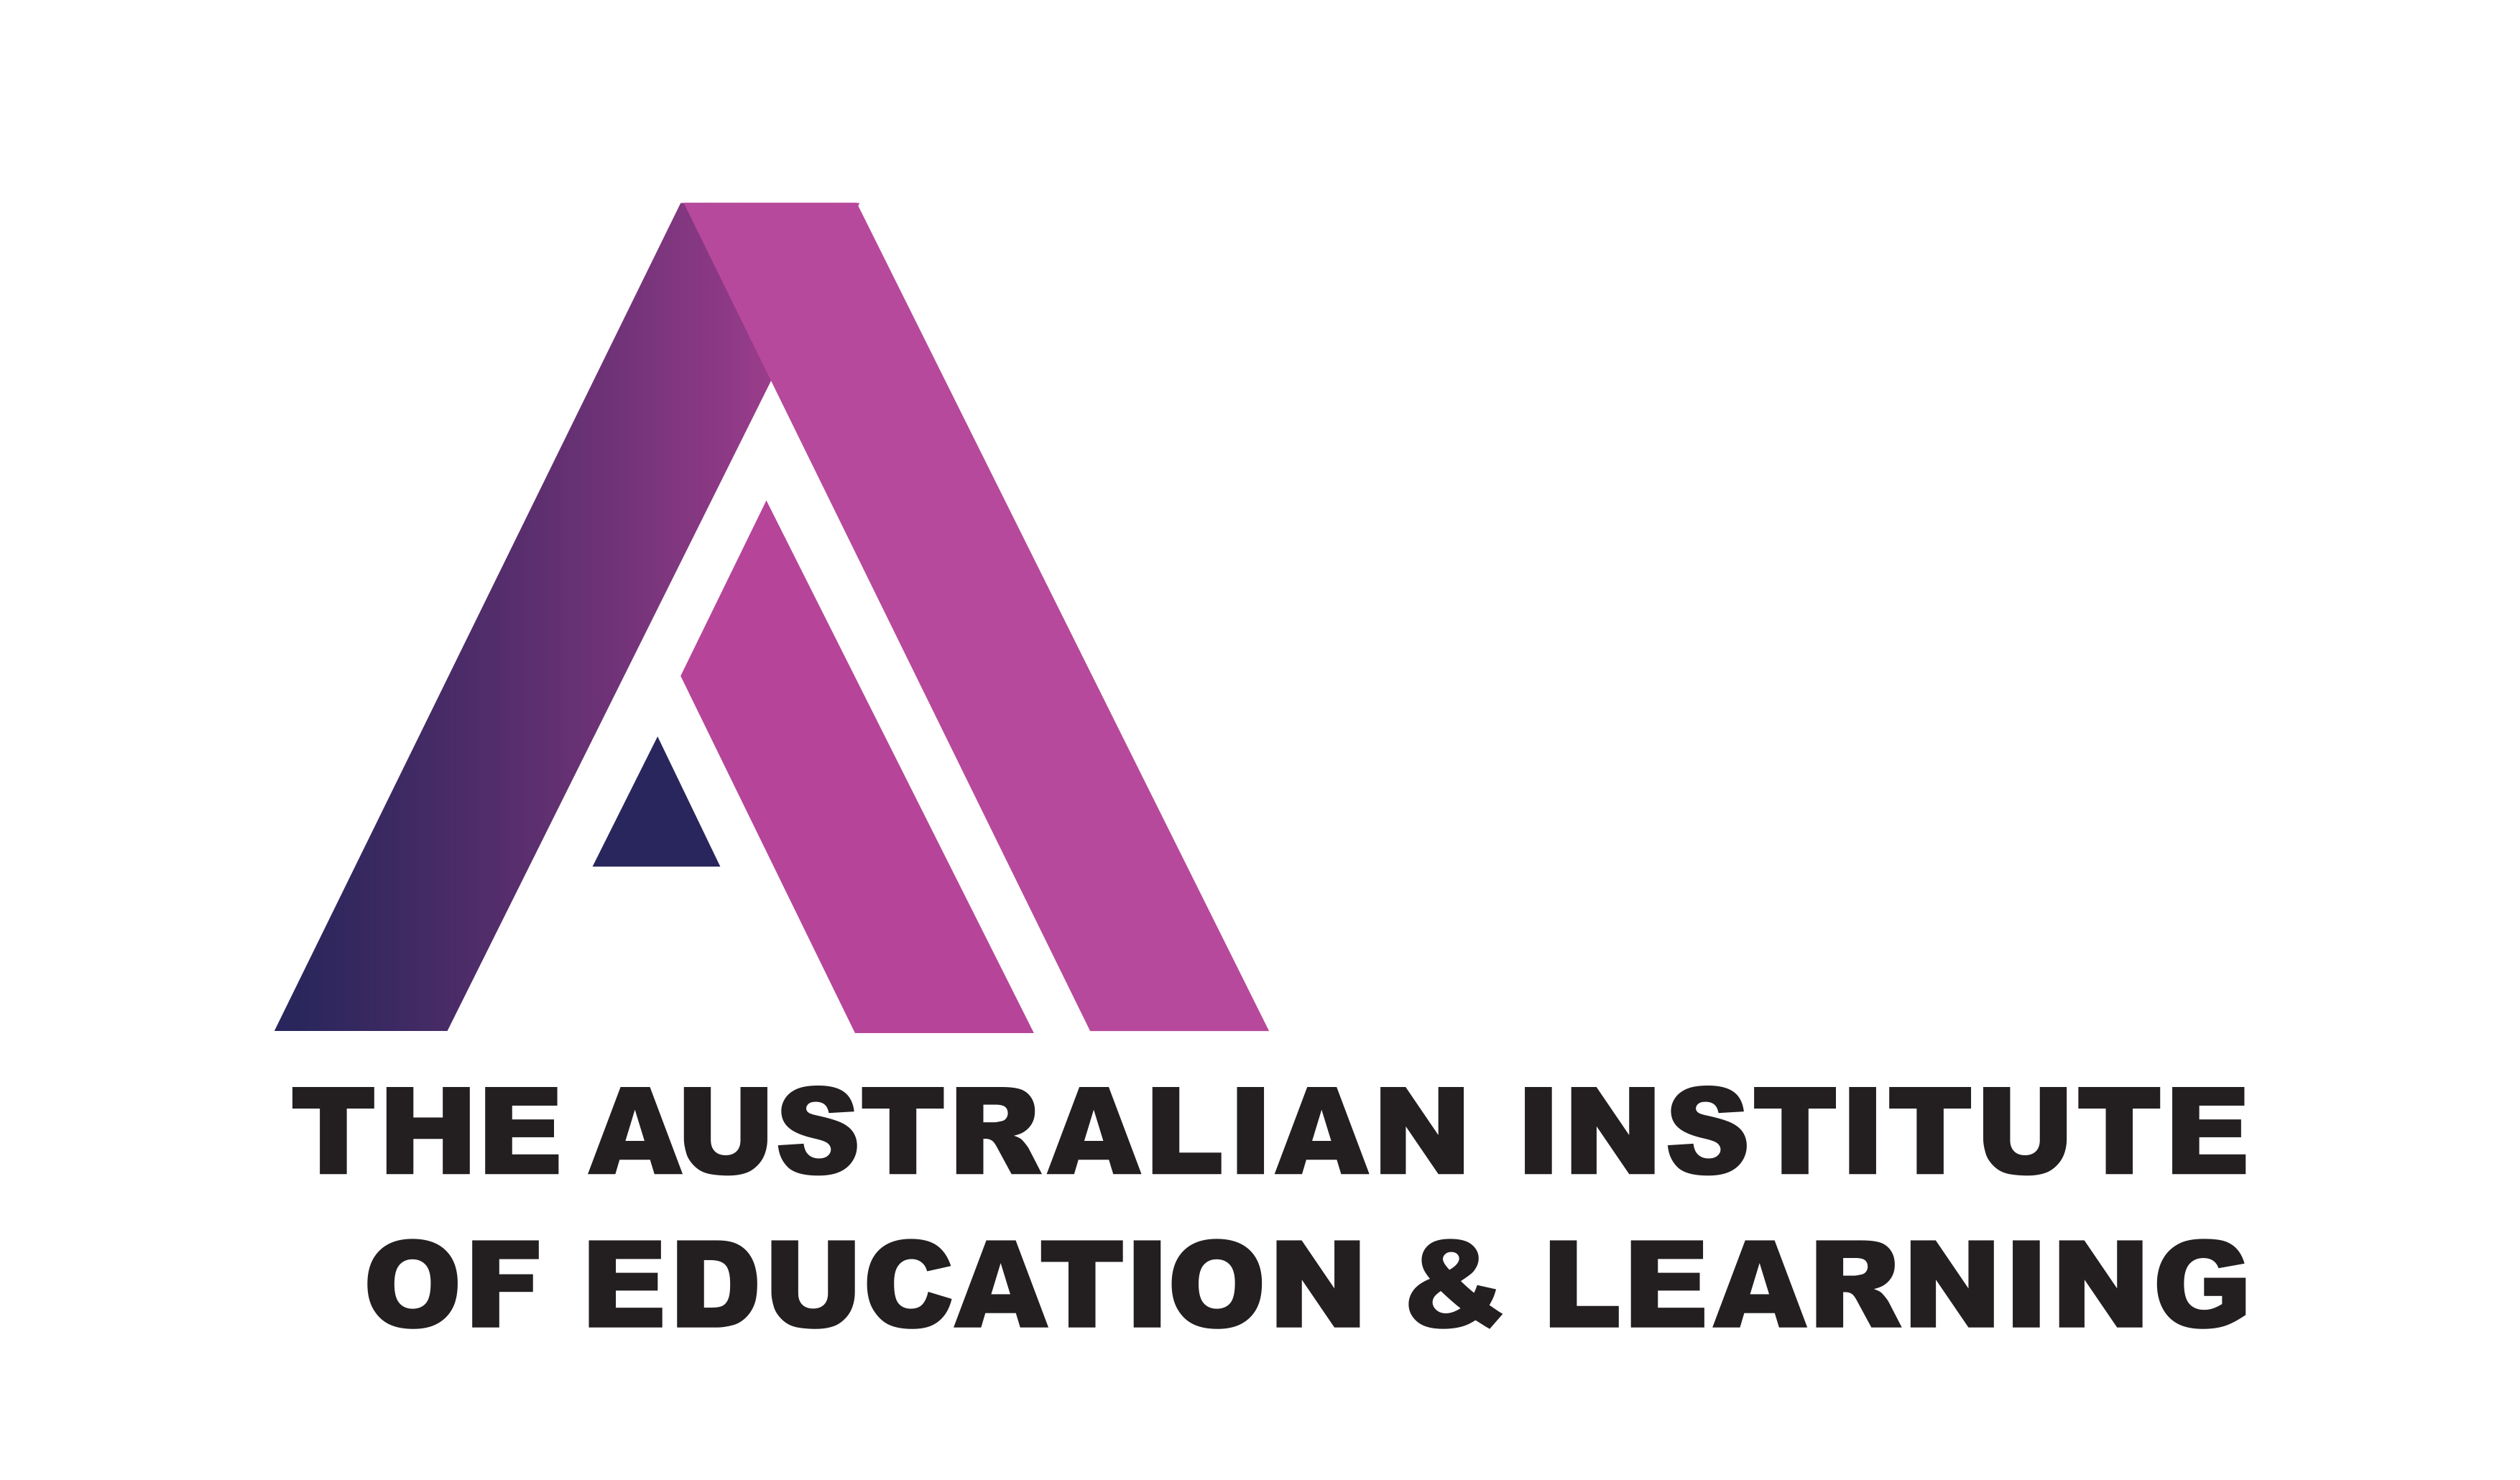 AUSTRALIAN INSTITUTE OF EDUCATION AND LEARNING